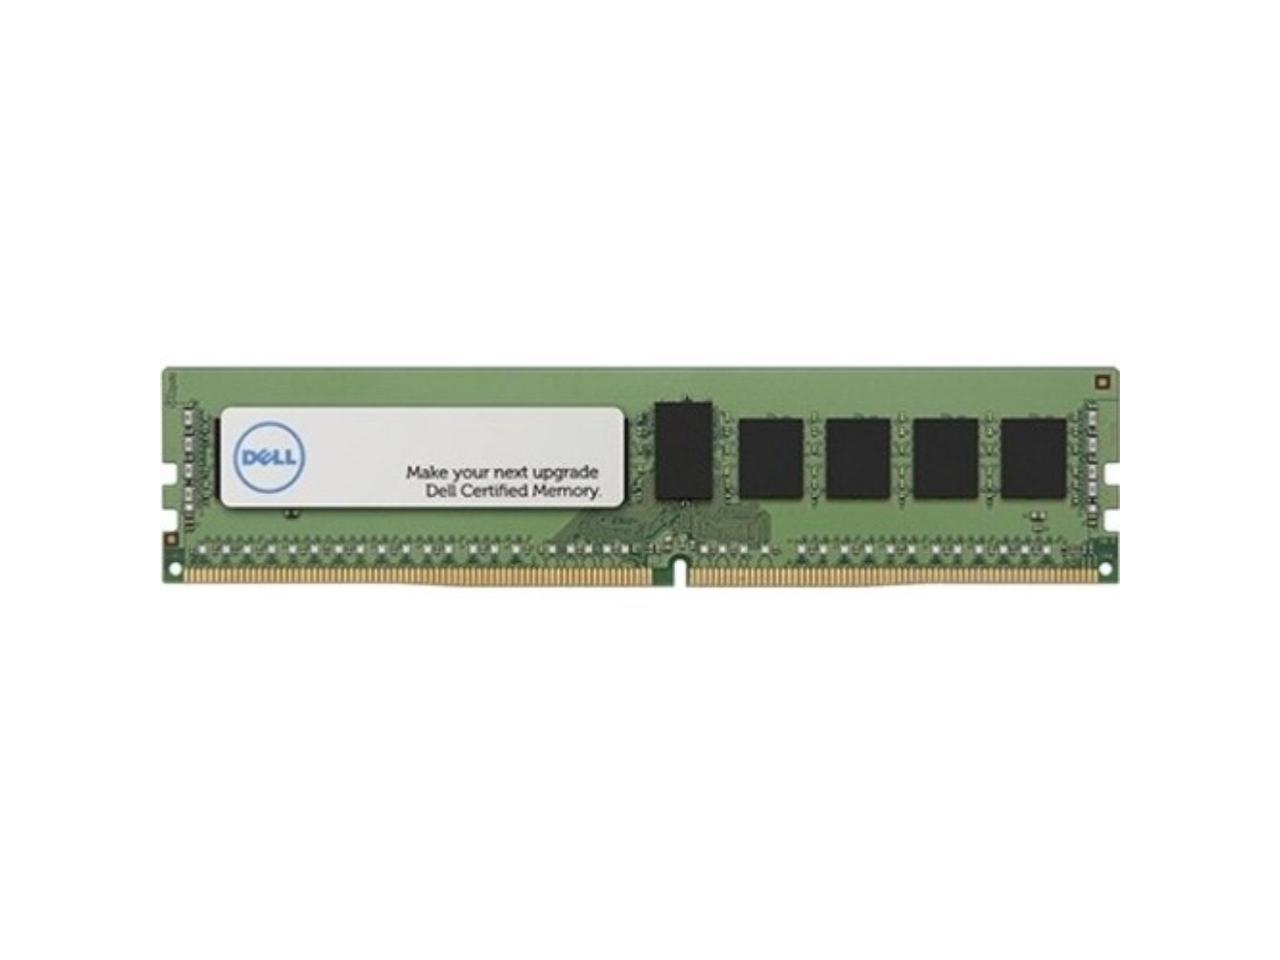 Dell Memory Upgrade - 32GB - 2Rx4 DDR4 RDIMM 2400MHz - A8711888  (SNPCPC7GC/32G)